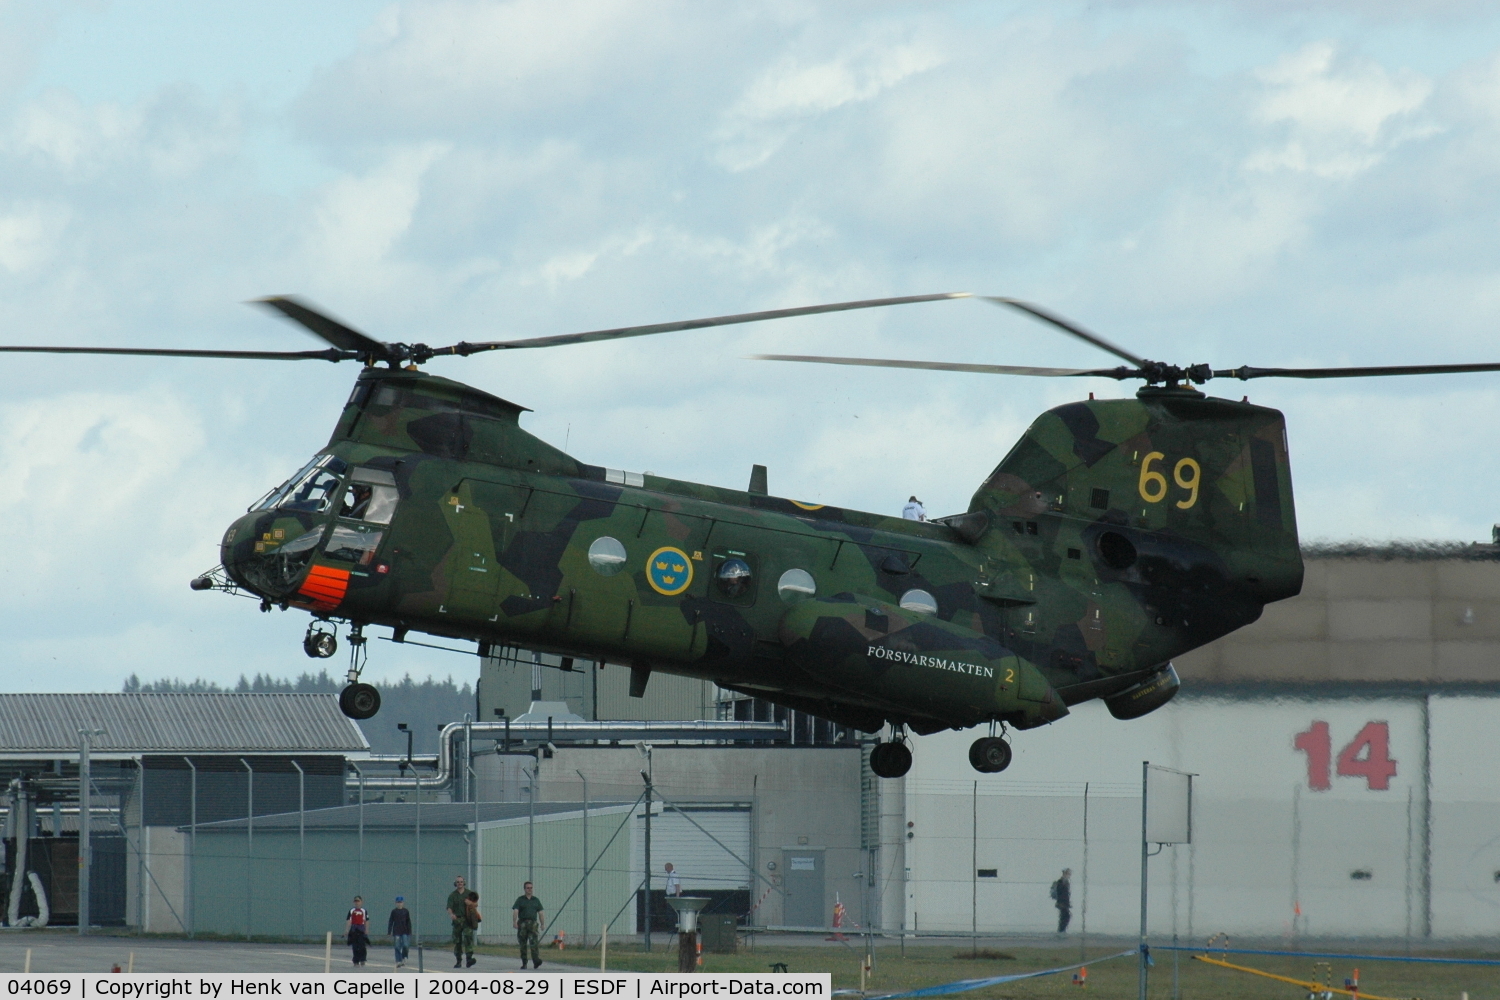 04069, Boeing Vertol Hkp4B C/N 4082, A Hkp4B helicopter of the Swedish Defense Helicopter Fleet hovering at Ronneby Air Base, Sweden.